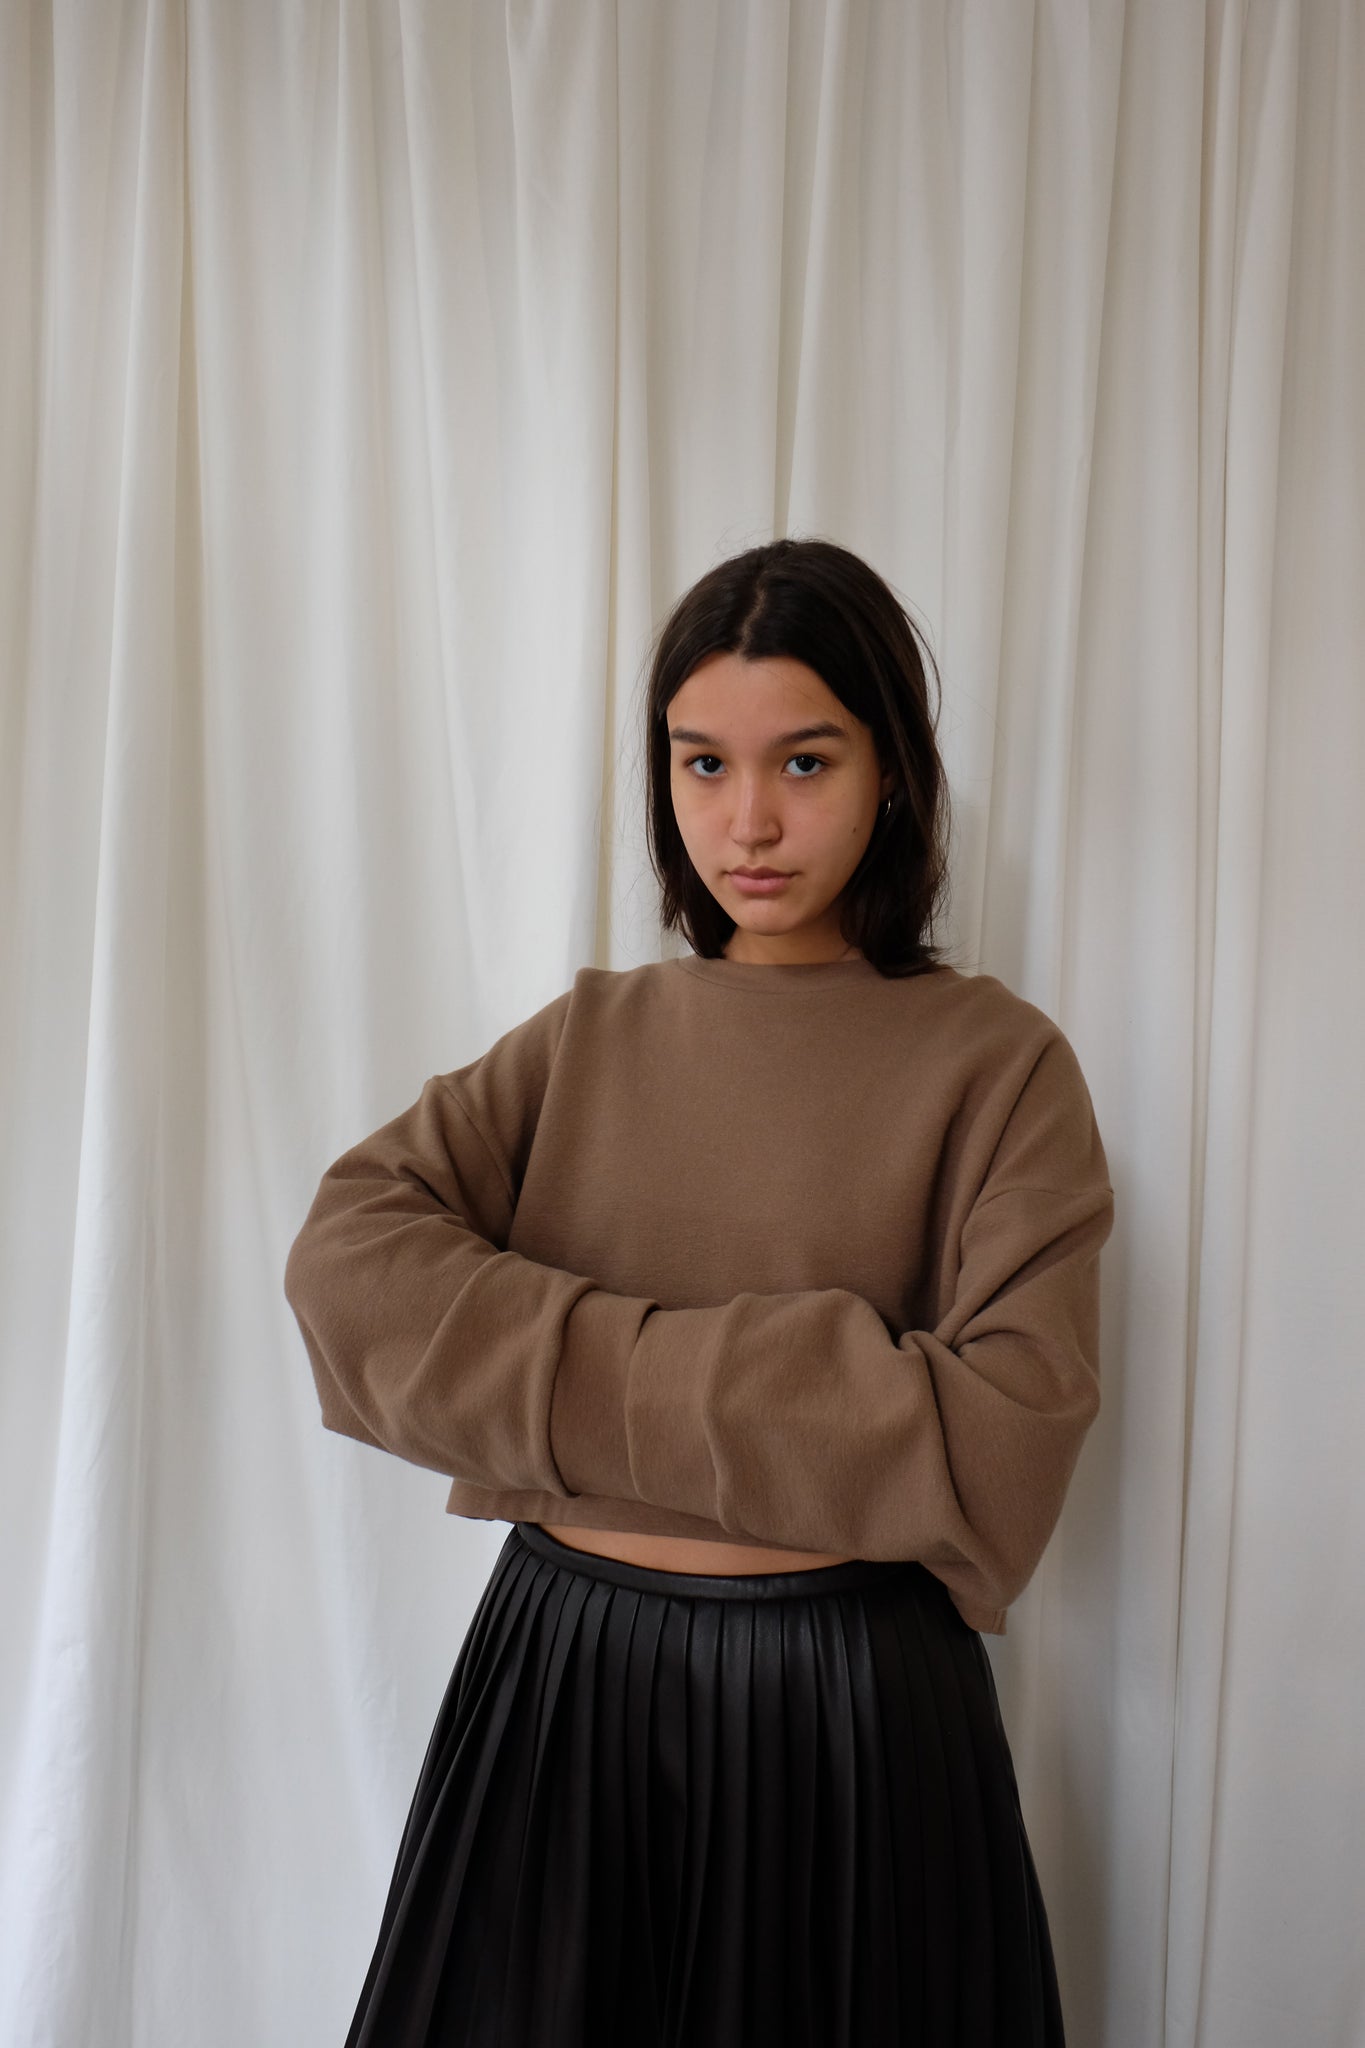 CROPPED SWEATER IN BROWN BY CAN PEP REY - BEYOND STUDIOS